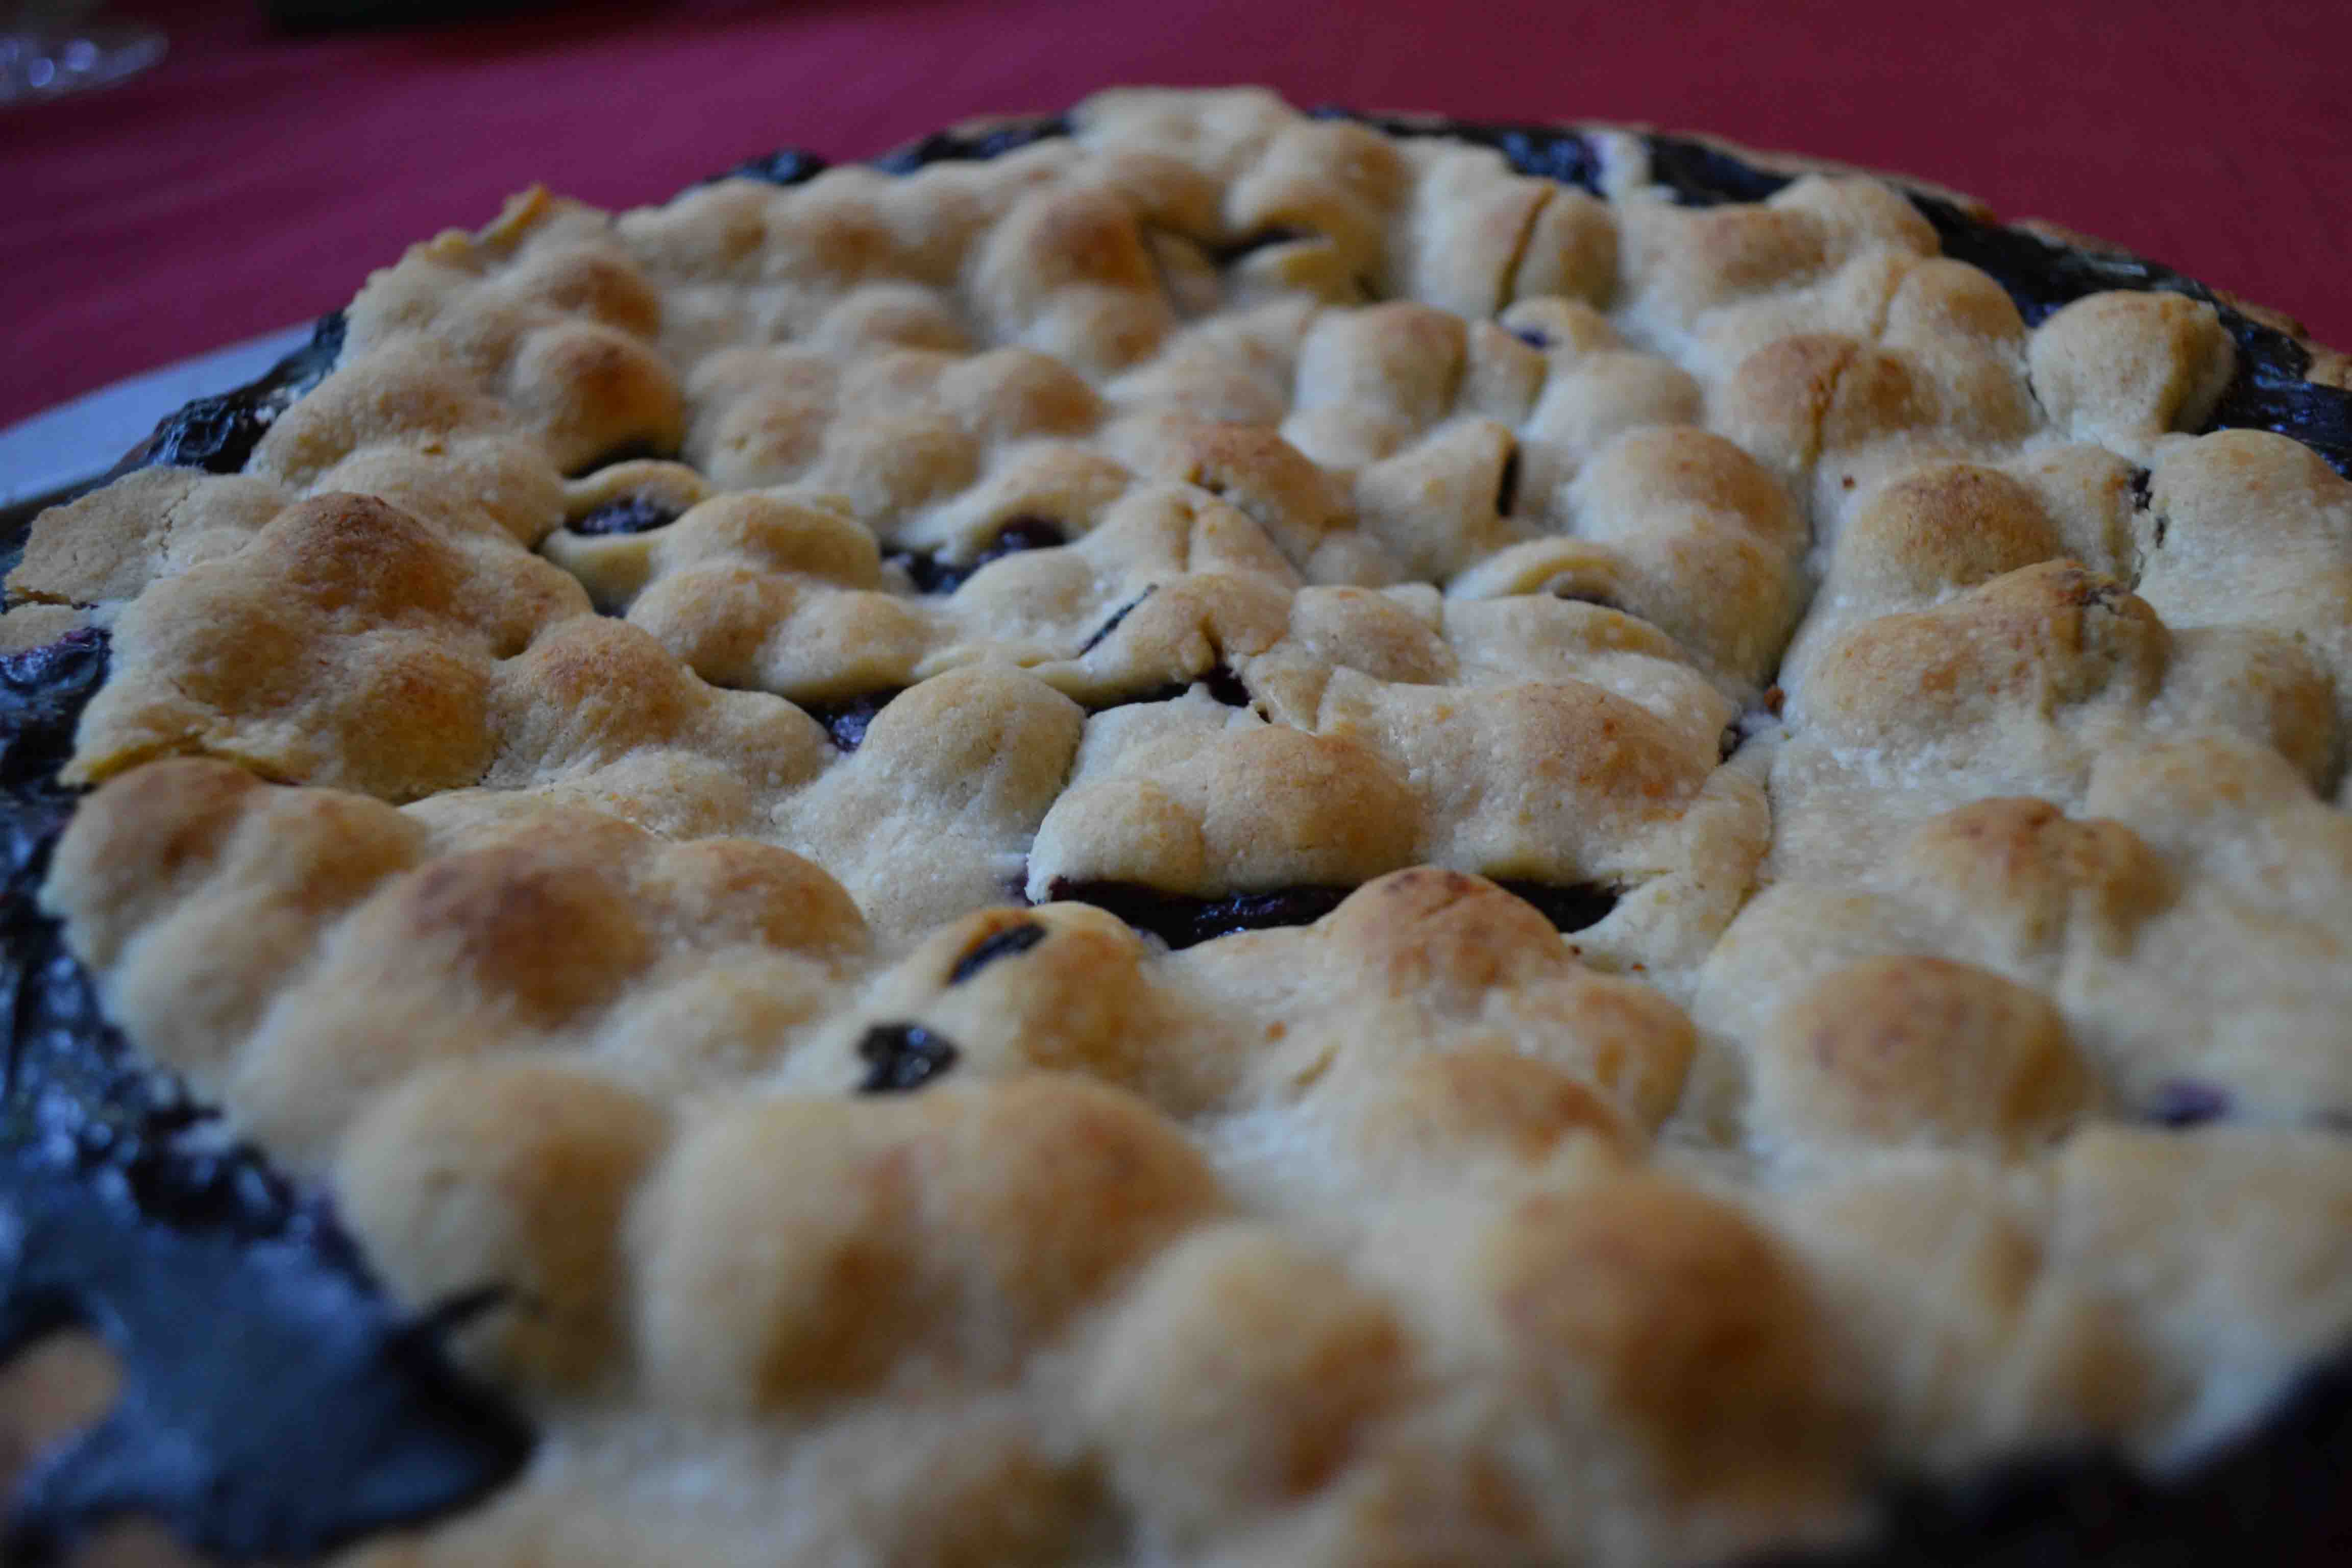 This blueberry pie recipe is simple and delicious!